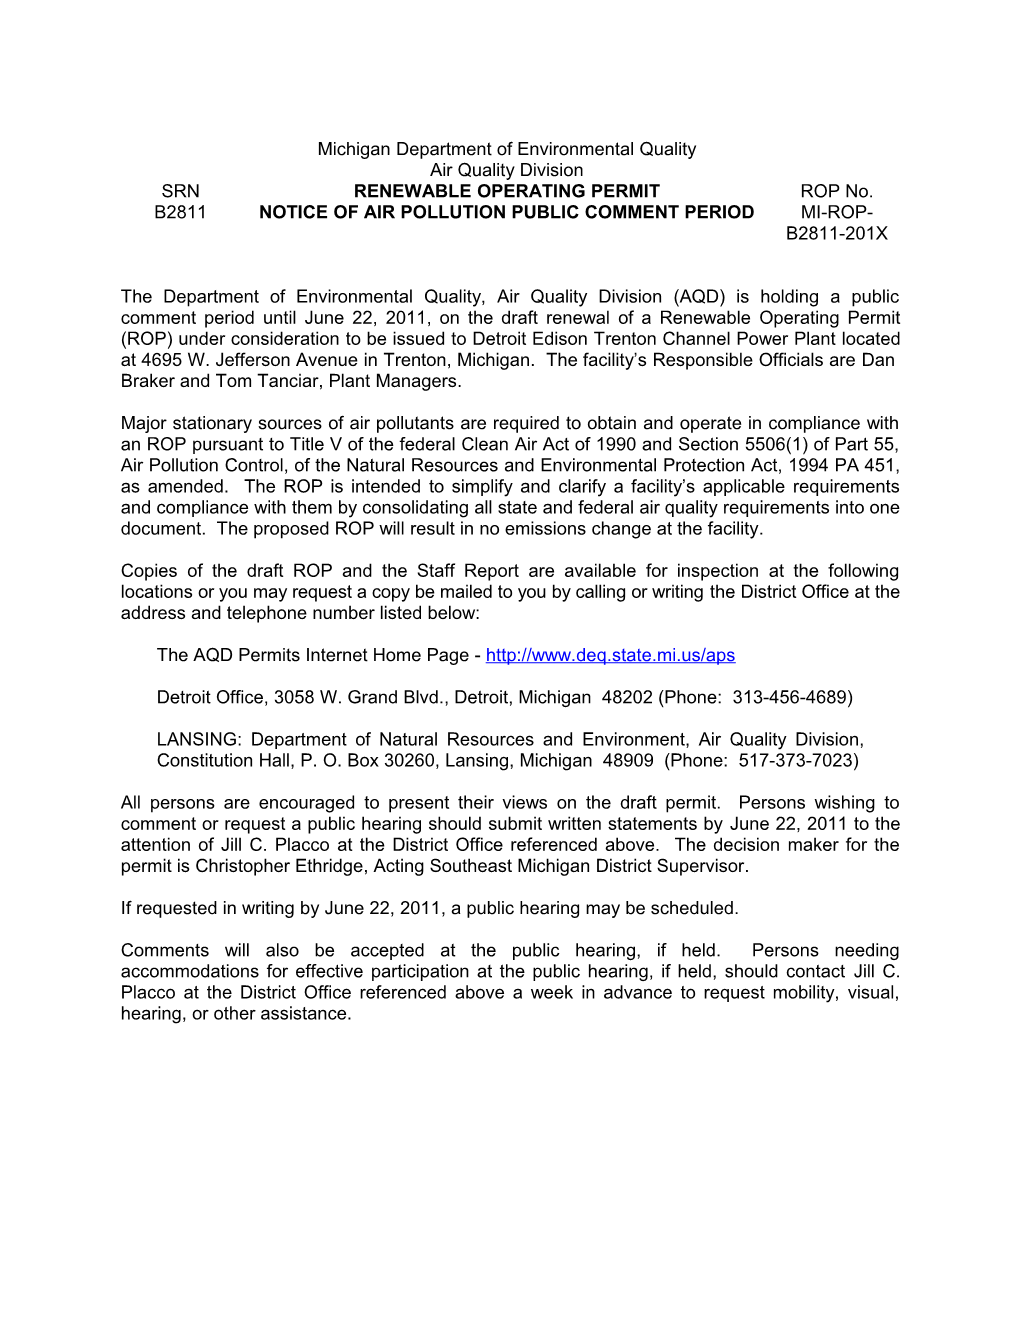 Notice of Air Pollution Public Comment Period for Ro Permit (Unlikely That Public Hearing